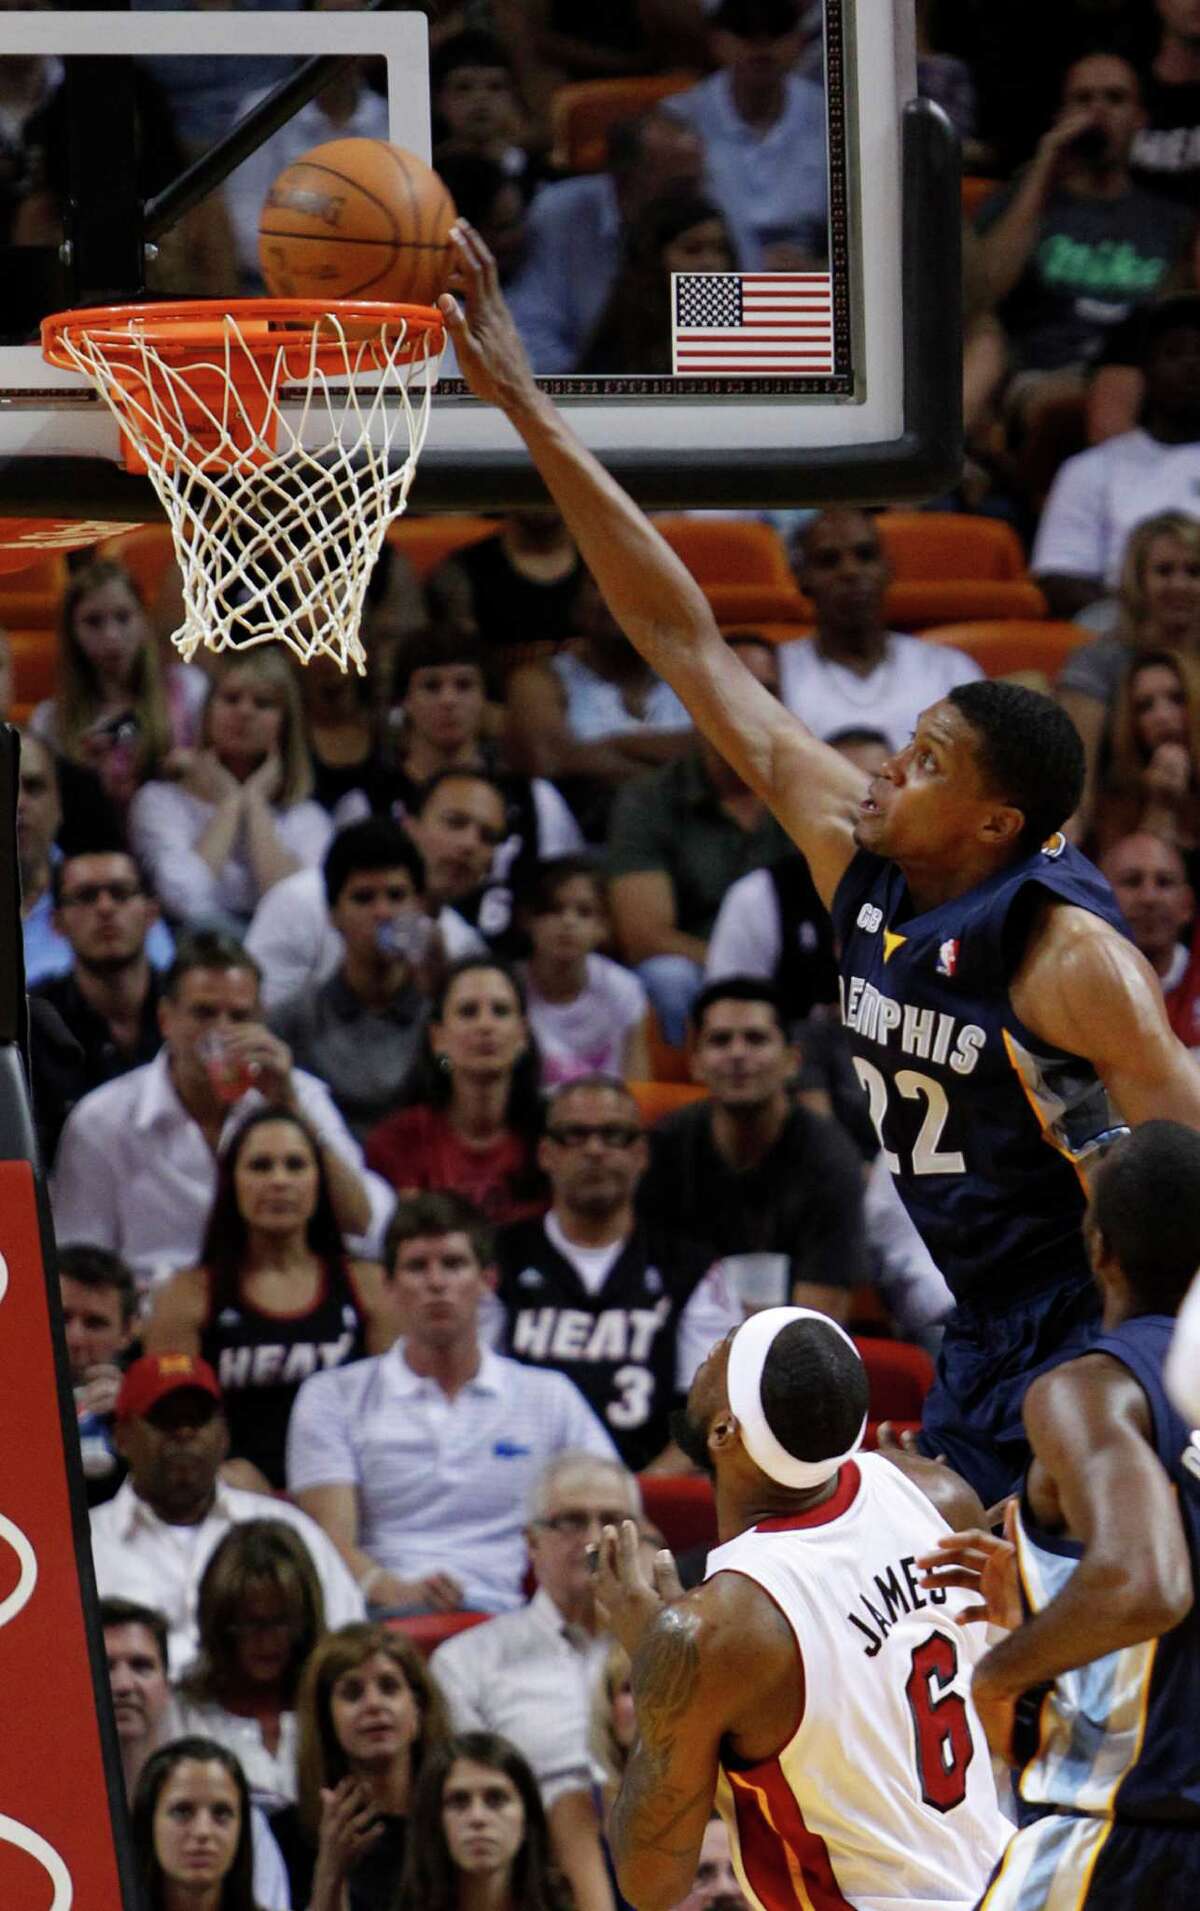 Memphis forward Rudy Gay (22) led the Grizzlies past the Heat and forward LeBron James, snapping the Heat's 17-game home win streak.